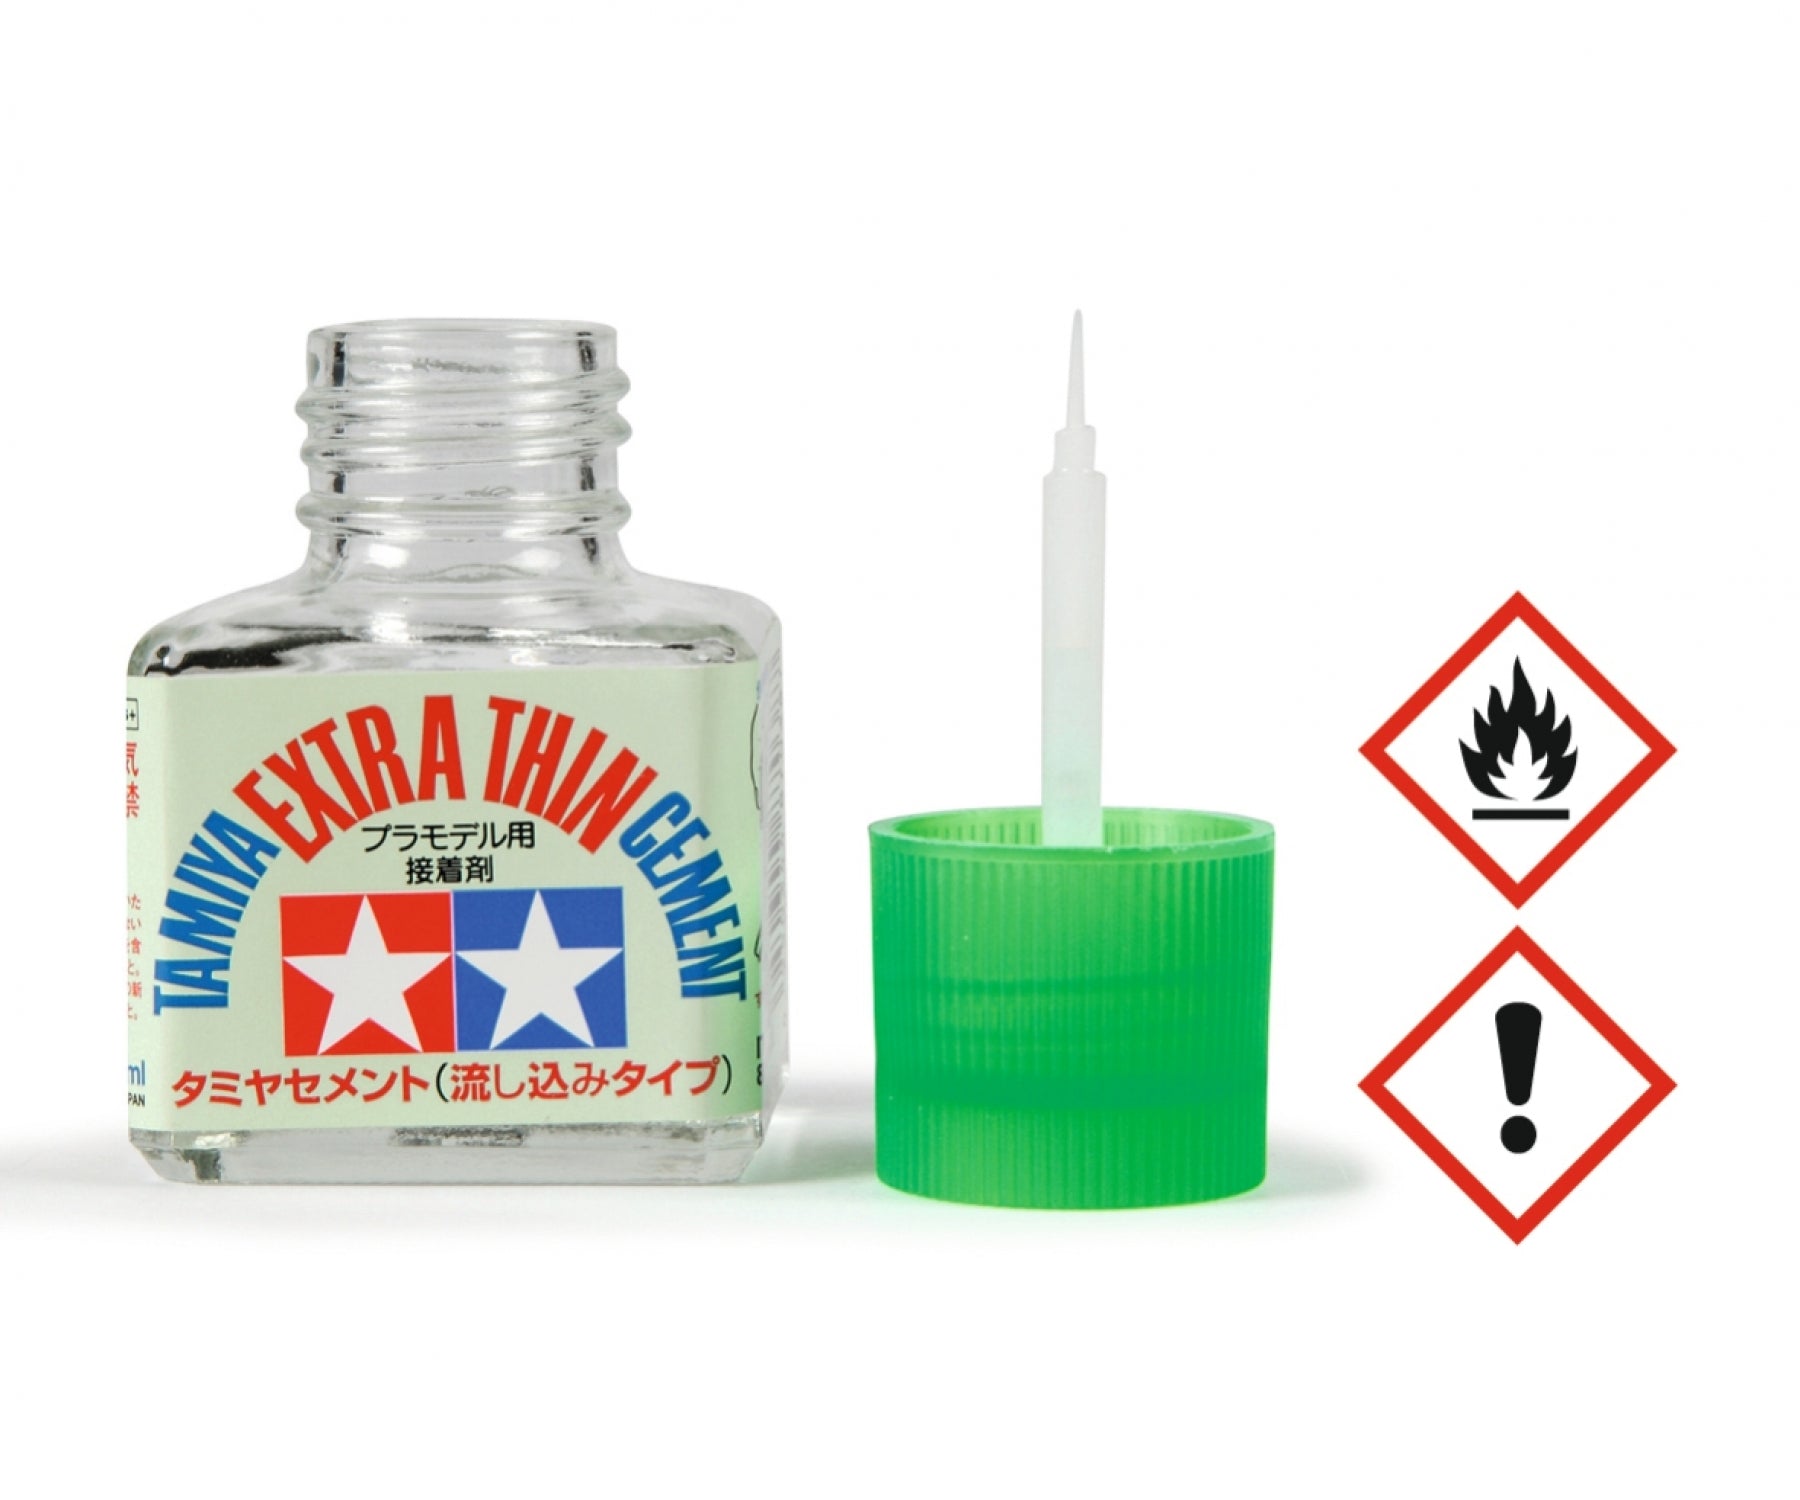 Tamiya Extra Thin Cement (Quick-Setting) 40ml Paint Bottle